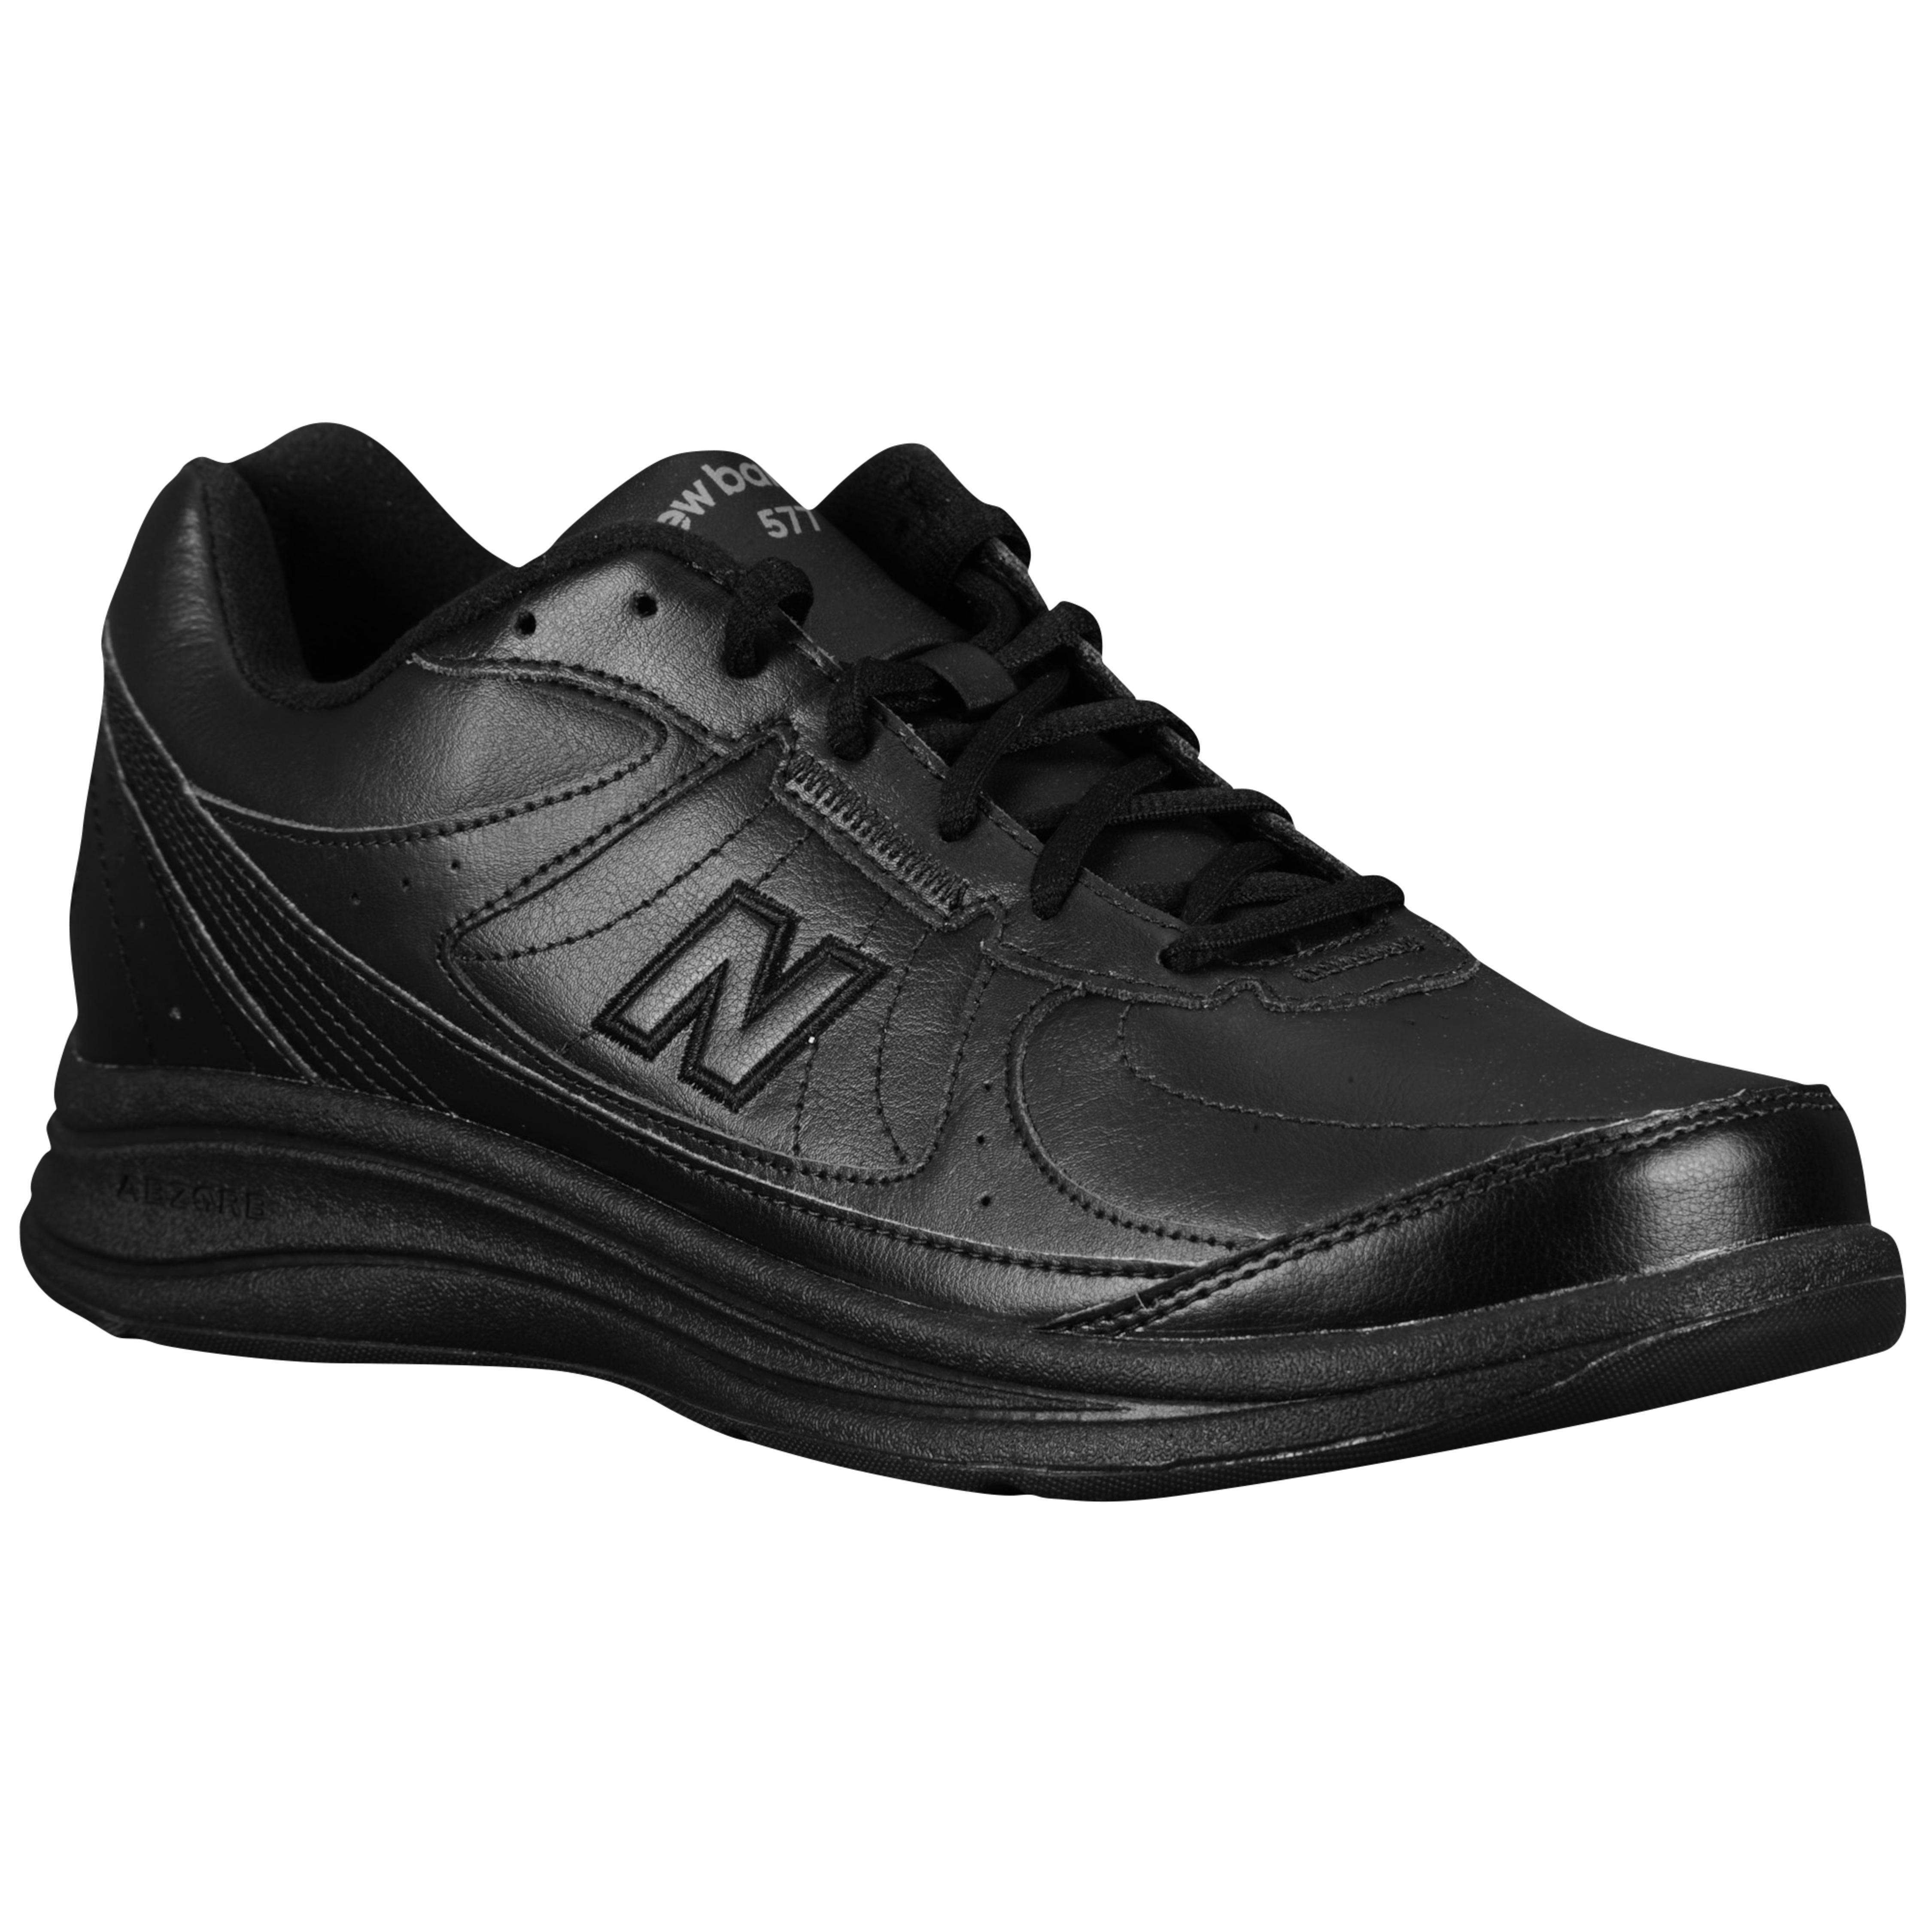 New Balance Leather 577 - Men's Walking Shoes - Black, Size 10.0 for ...